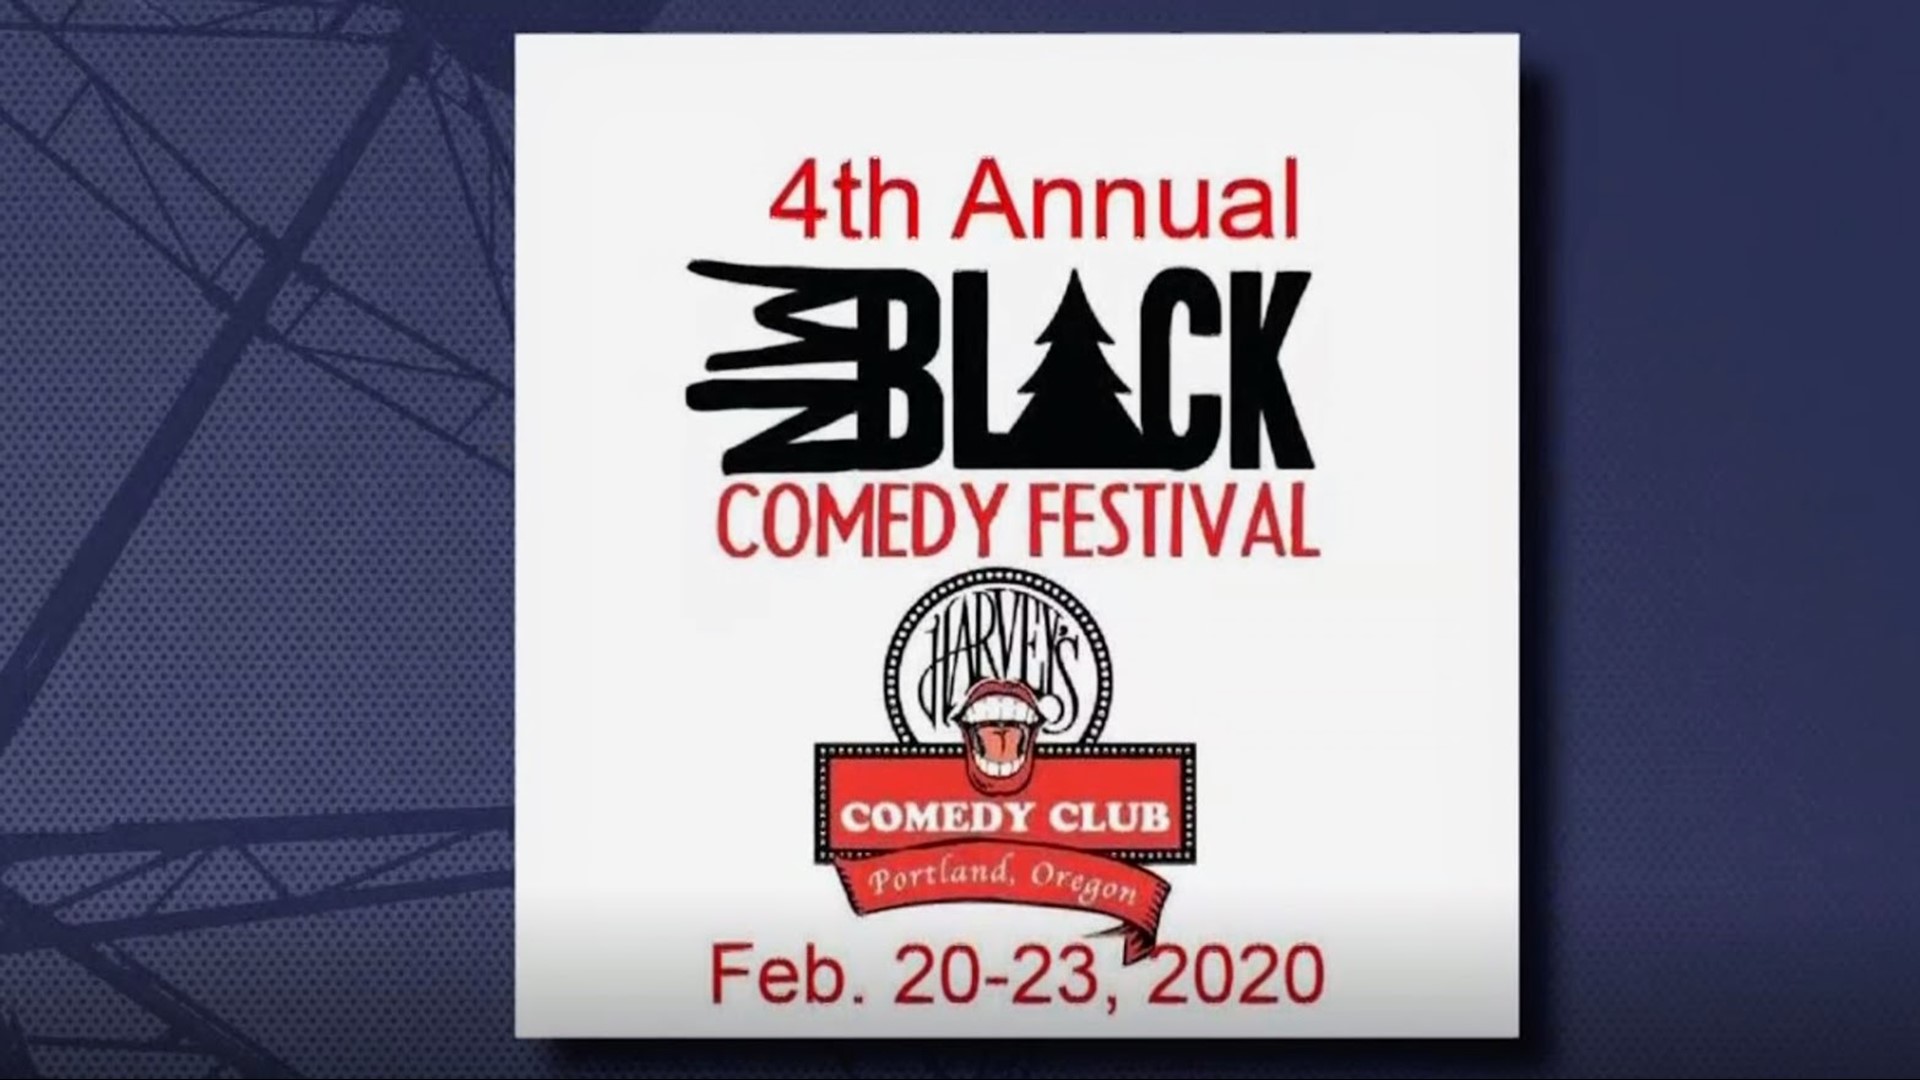 Enjoy 4 days of incredible comedians at the 4th annual NW Black Comedy Festival at Harvey's Comedy Club. nwblackcomedyfestival.com